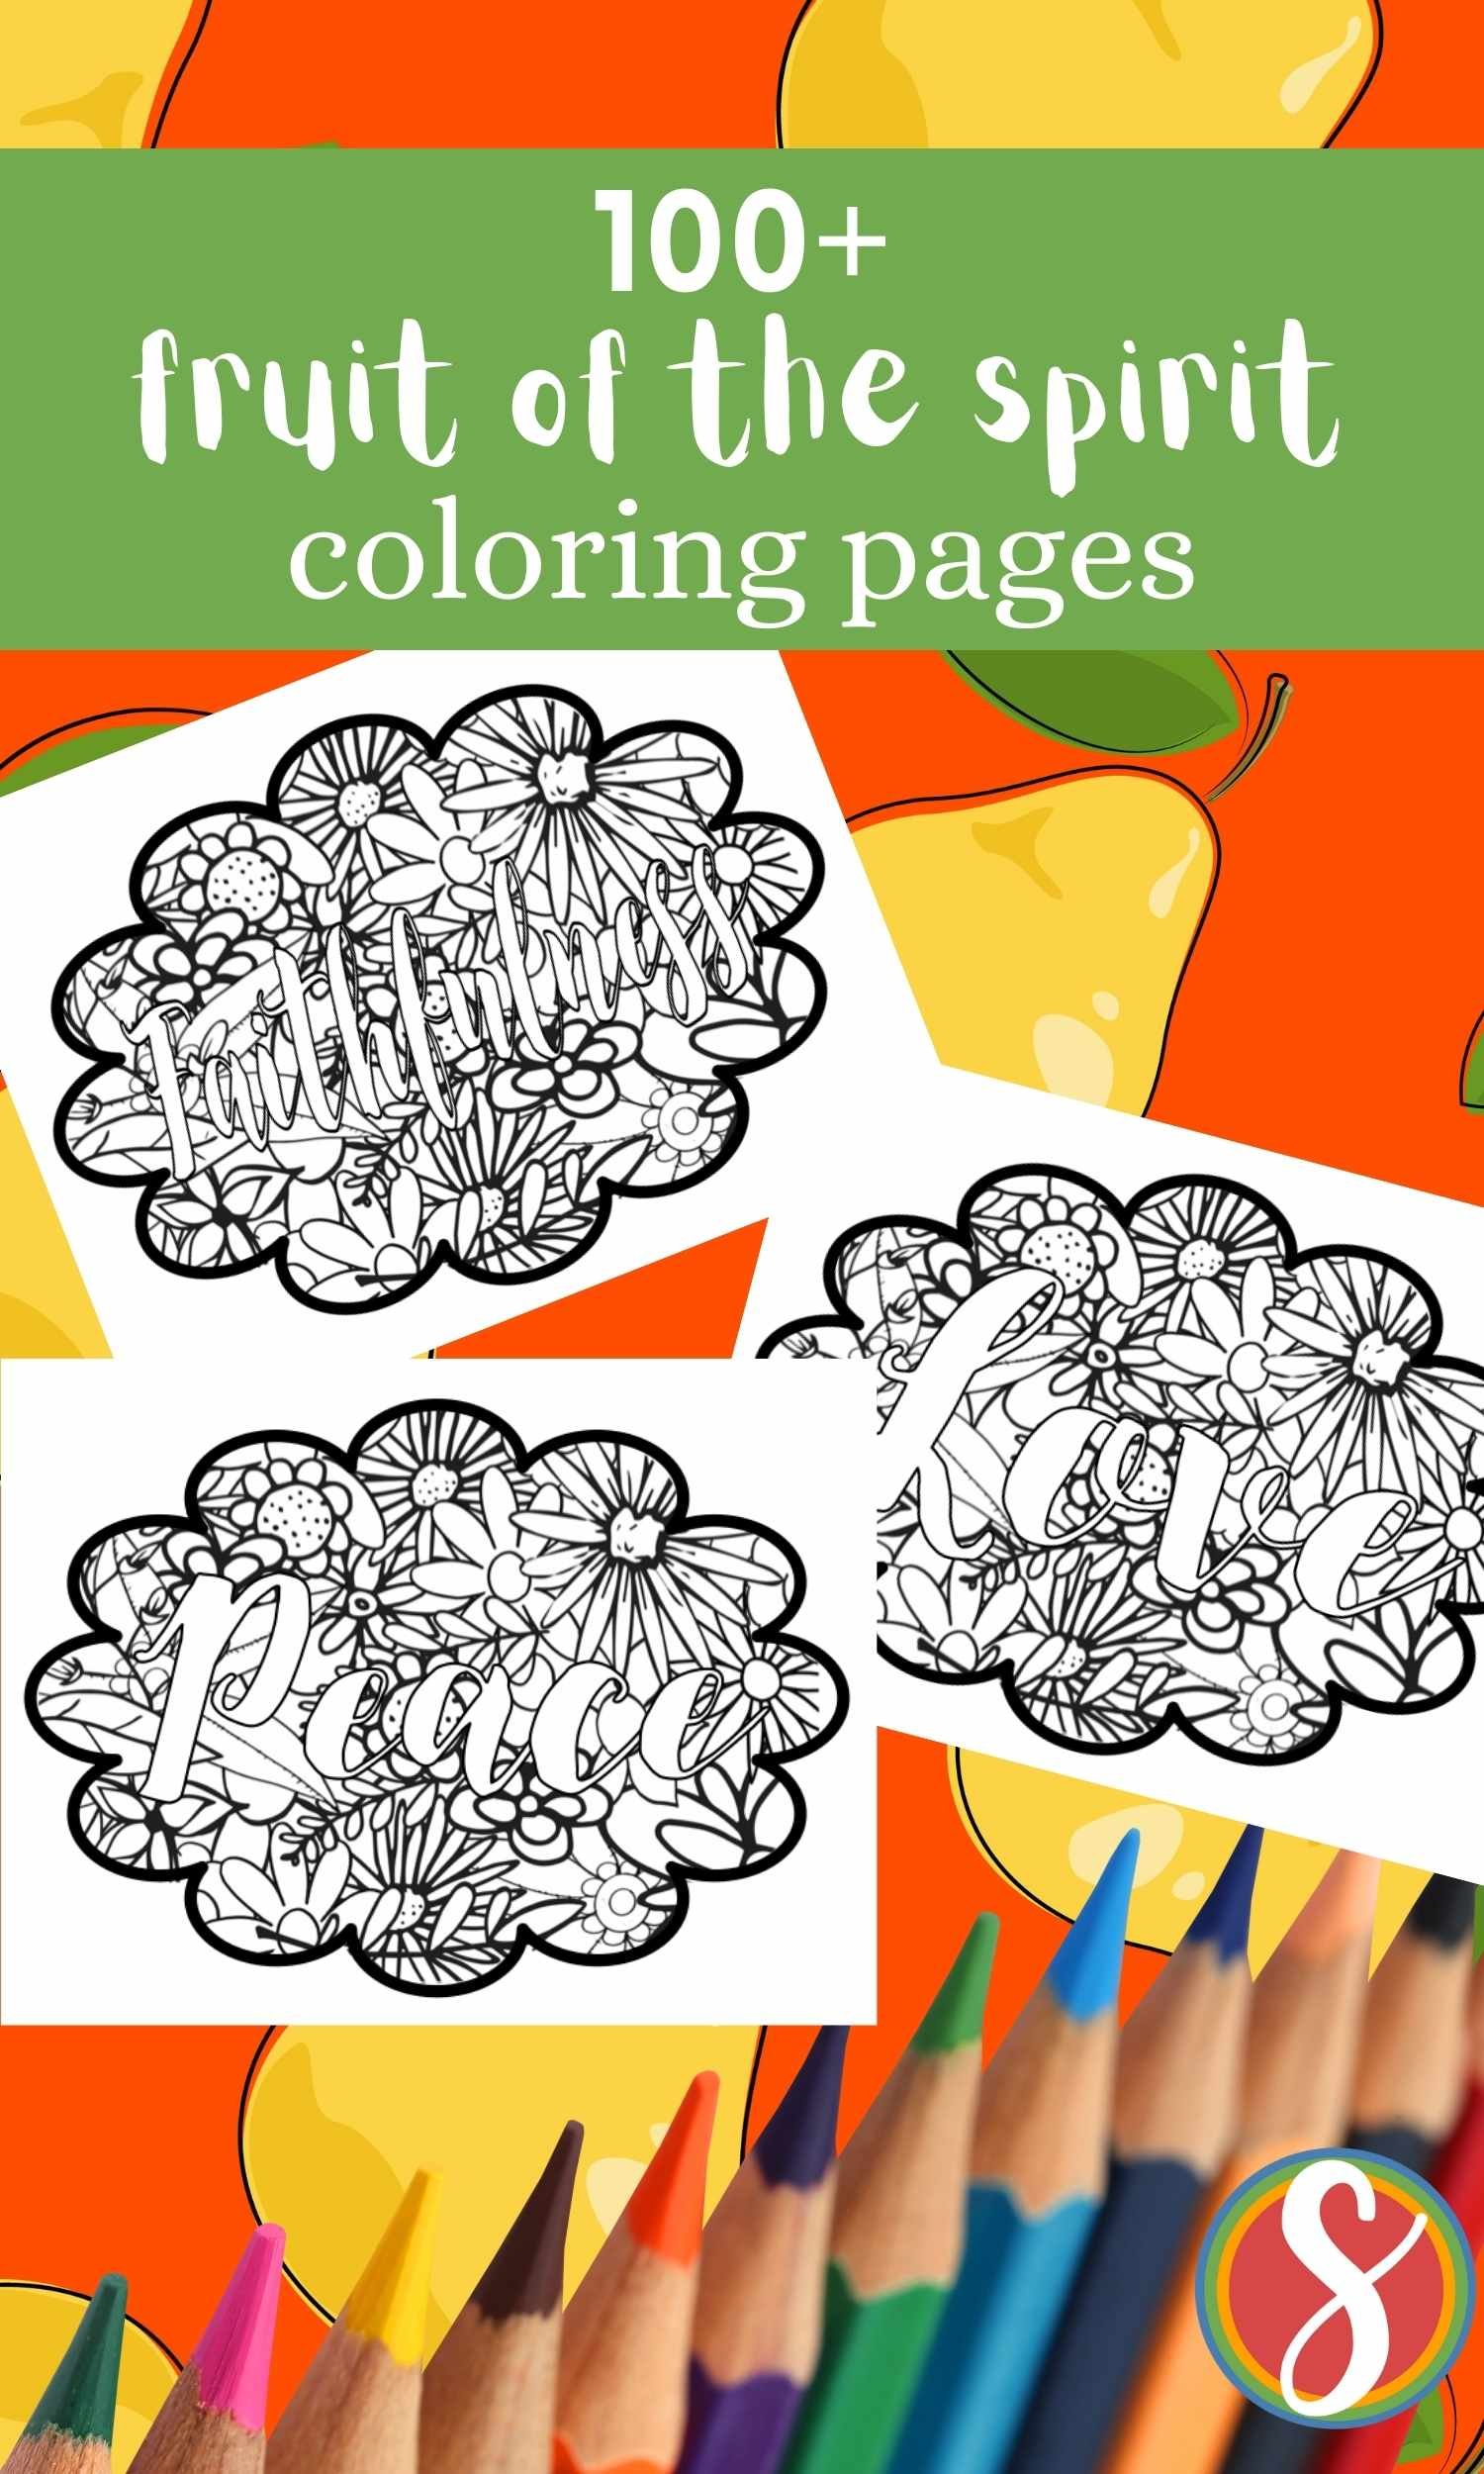 collage of fruit of the spirit coloring pages, each fruit name set inside a cloud full of colorable flowers